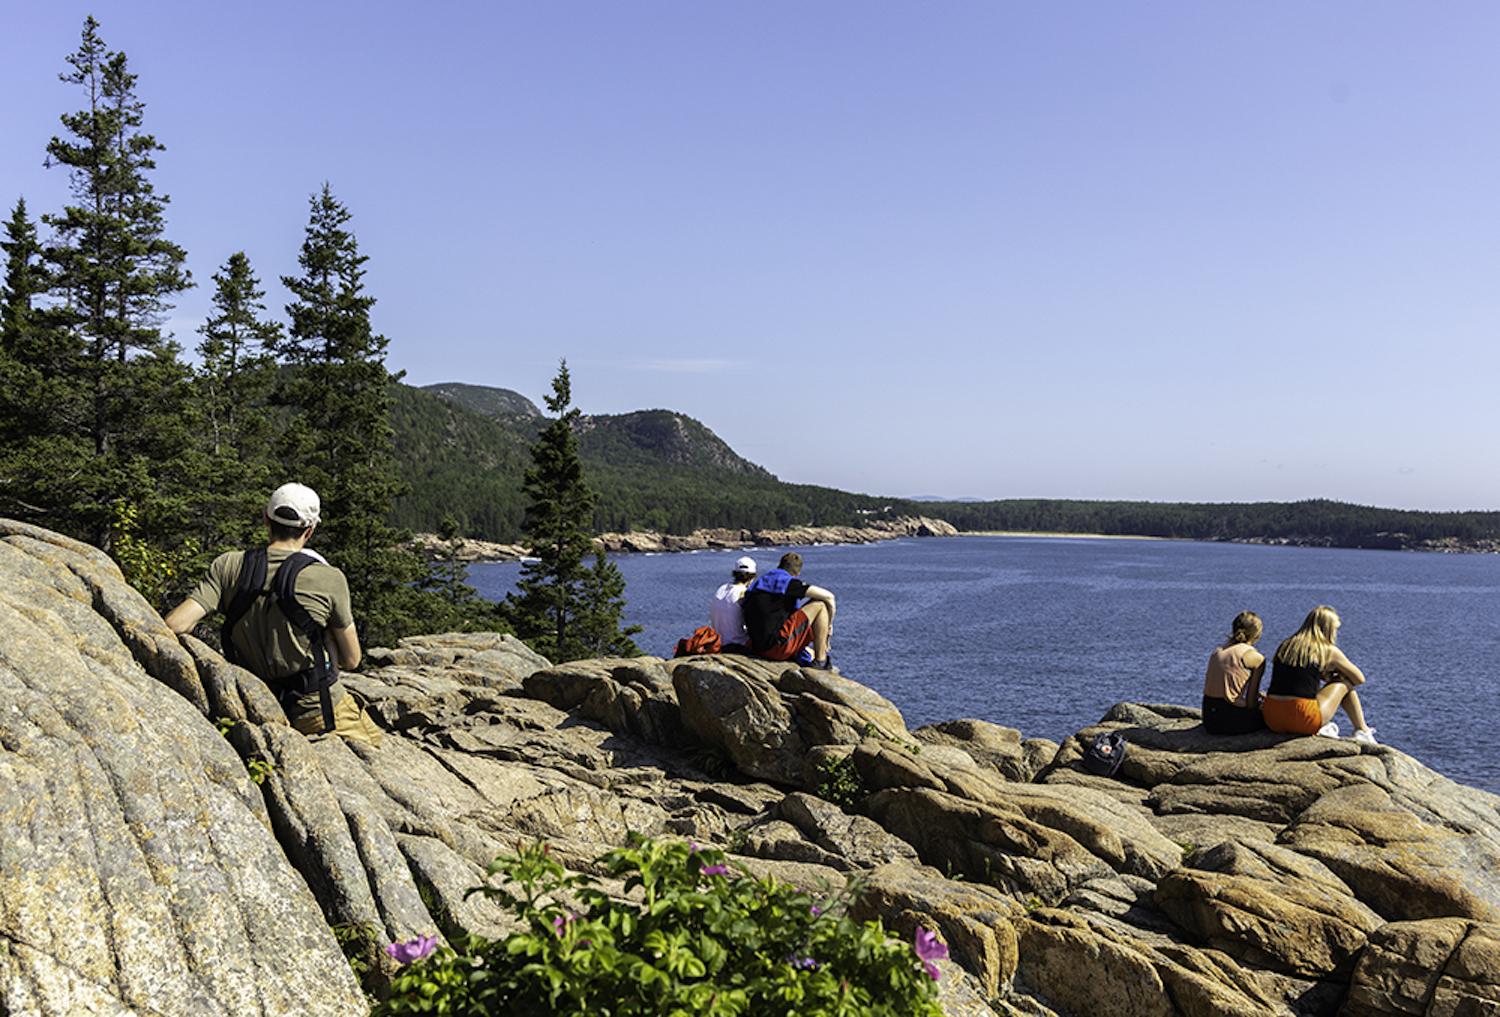 Visitors sit watching the ocean at Otter Cliffs along Park Loop Road in Acadia National Park. (Photo by Lily LaRegina/Friends of Acadia)